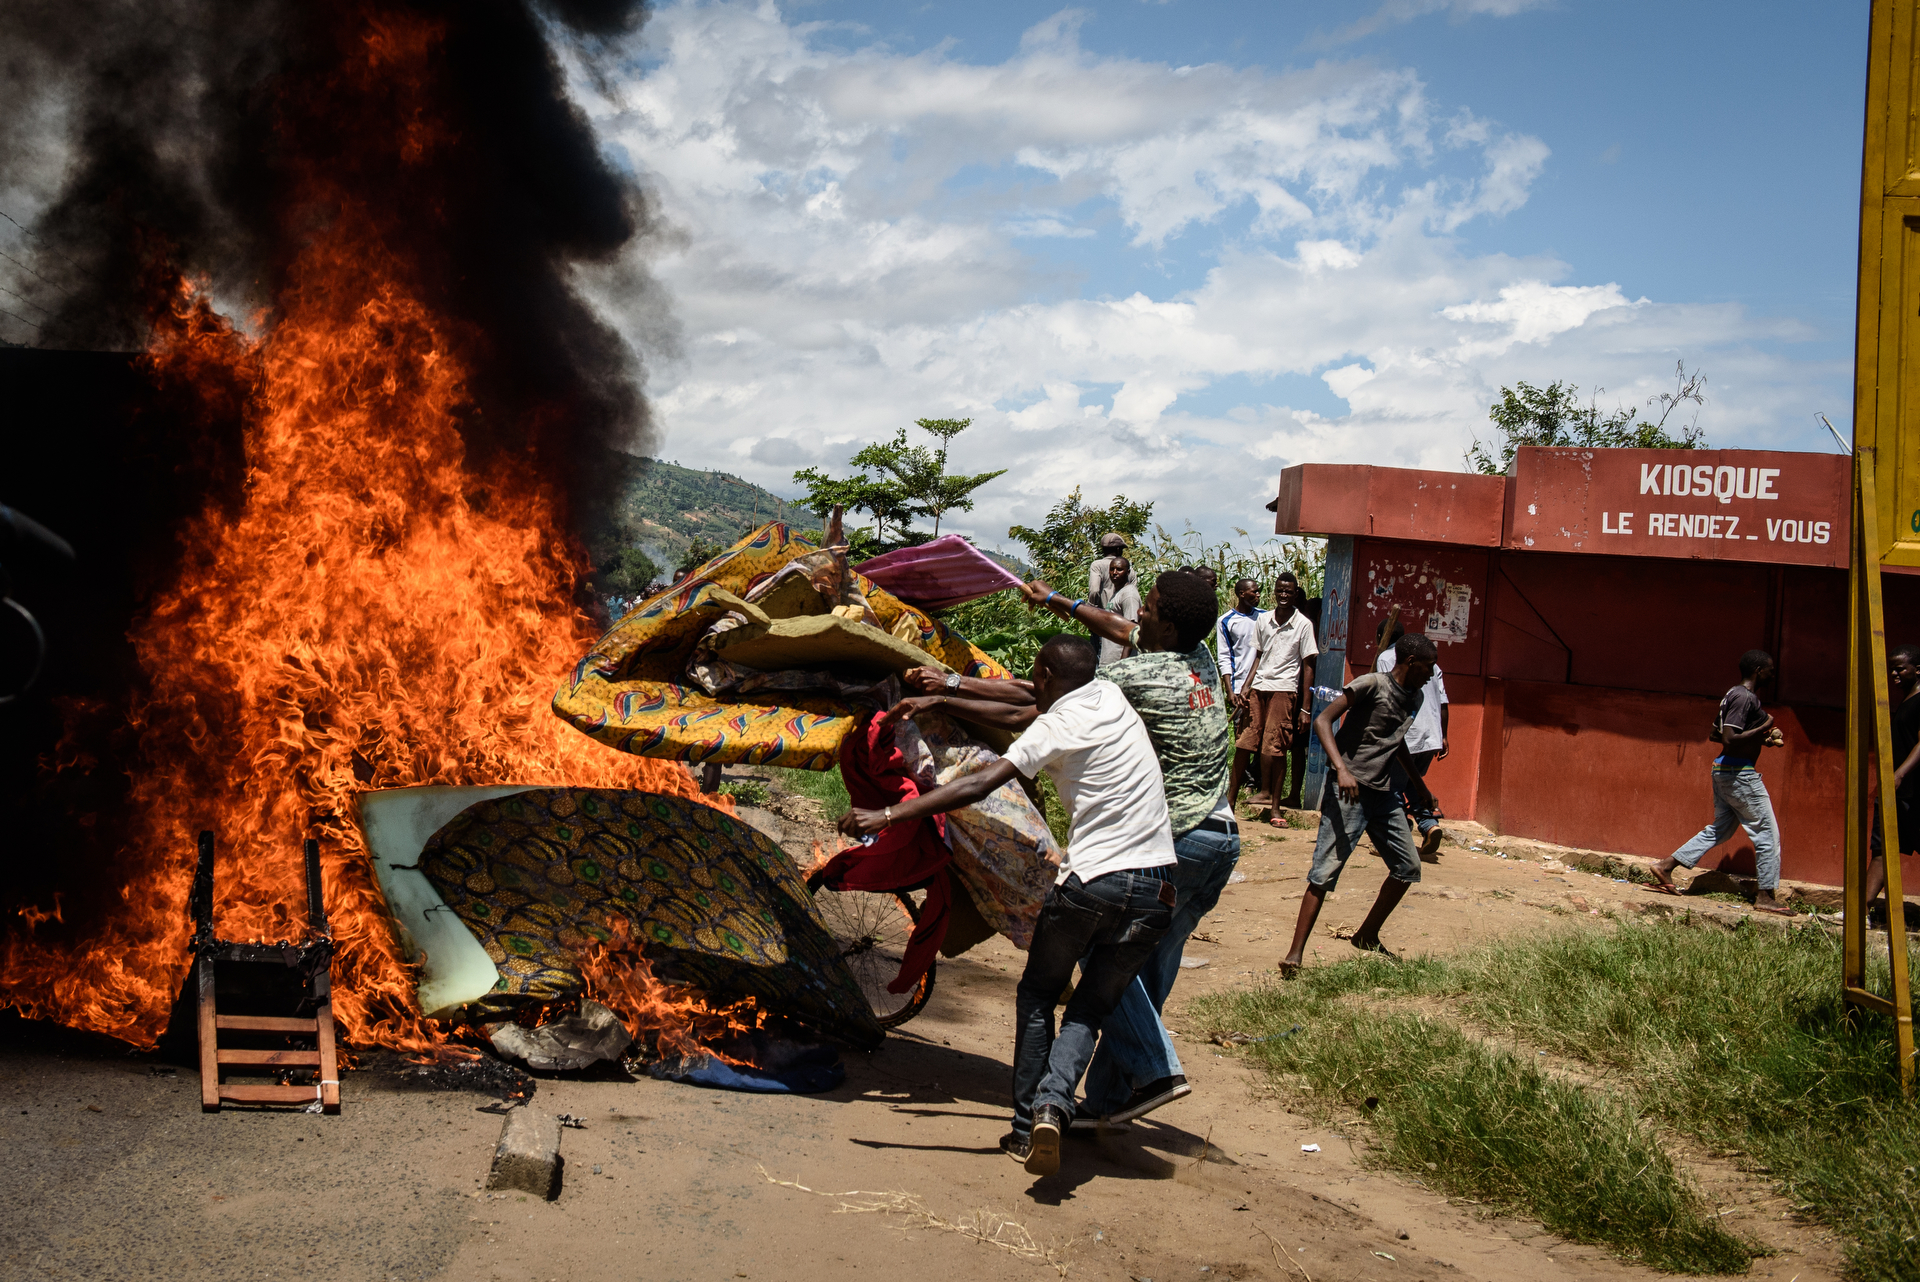  People burn mattresses looted from the local police post in Musaga on 13 May Demonstrations protesting incumbent president Pierre Nkurunziza's bid for a 3rd term continued in Bujumbura, Burundi on 13 May 2015. In the neighborhood of Musaga, hundreds